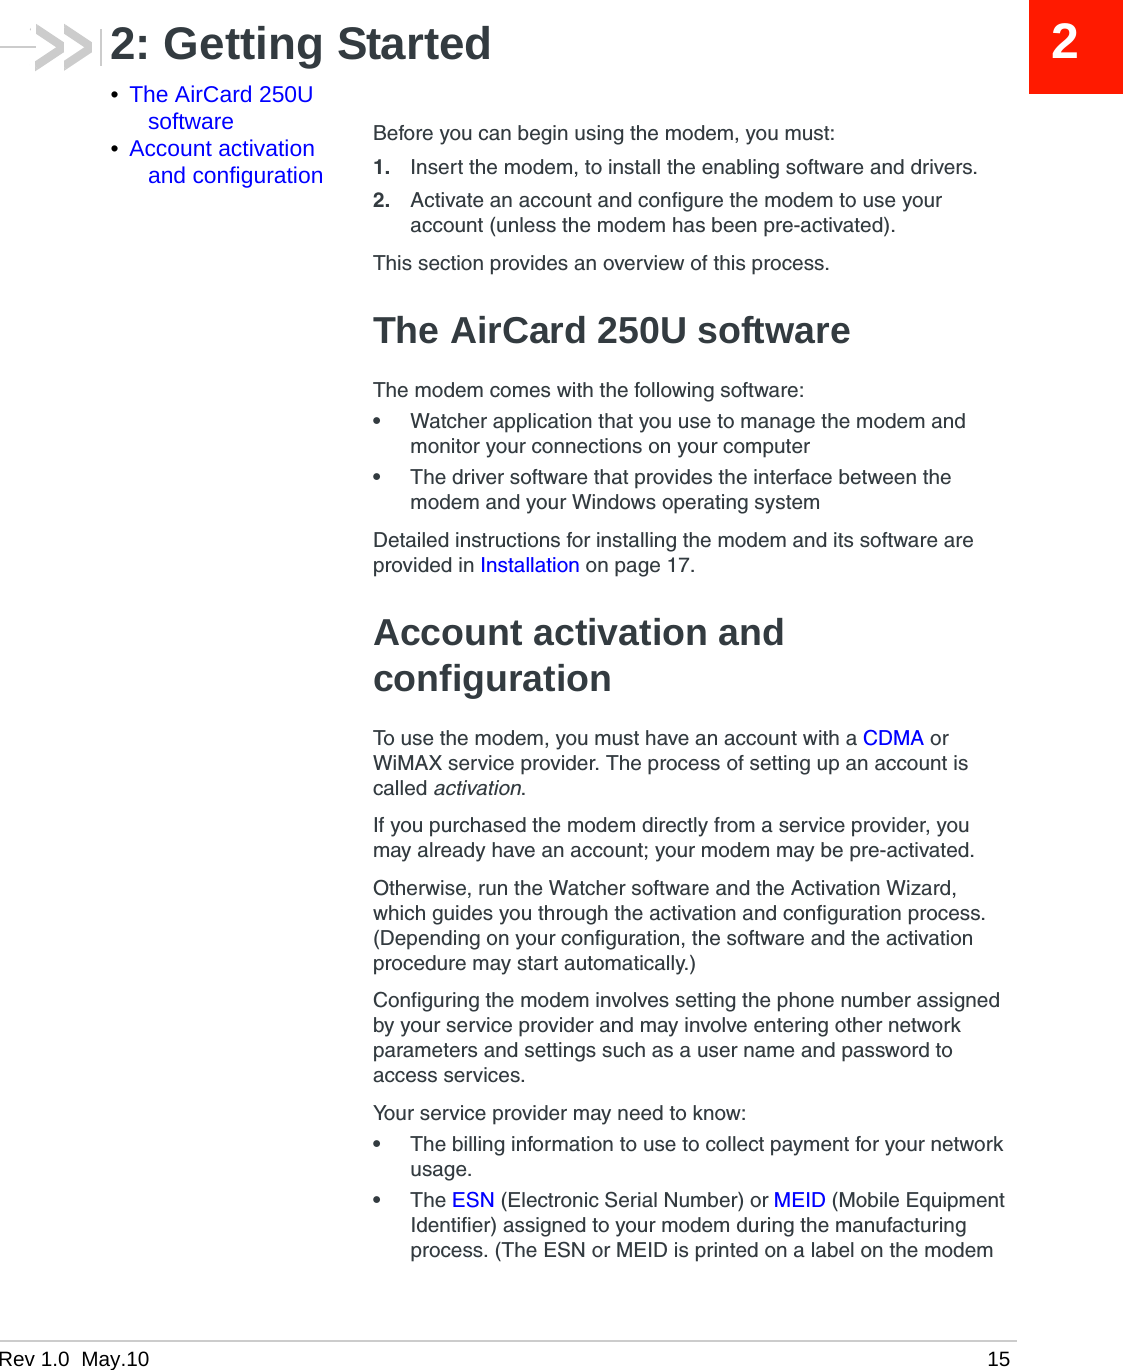 Rev 1.0  May.10 1522: Getting Started•The AirCard 250U software•Account activation and configurationBefore you can begin using the modem, you must:1. Insert the modem, to install the enabling software and drivers.2. Activate an account and configure the modem to use your account (unless the modem has been pre-activated).This section provides an overview of this process.The AirCard 250U softwareThe modem comes with the following software:•Watcher application that you use to manage the modem and monitor your connections on your computer•The driver software that provides the interface between the modem and your Windows operating systemDetailed instructions for installing the modem and its software are provided in Installation on page 17.Account activation and configurationTo use the modem, you must have an account with a CDMA or WiMAX service provider. The process of setting up an account is called activation.If you purchased the modem directly from a service provider, you may already have an account; your modem may be pre-activated.Otherwise, run the Watcher software and the Activation Wizard, which guides you through the activation and configuration process. (Depending on your configuration, the software and the activation procedure may start automatically.)Configuring the modem involves setting the phone number assigned by your service provider and may involve entering other network parameters and settings such as a user name and password to access services.Your service provider may need to know:•The billing information to use to collect payment for your network usage.•The ESN (Electronic Serial Number) or MEID (Mobile Equipment Identifier) assigned to your modem during the manufacturing process. (The ESN or MEID is printed on a label on the modem 